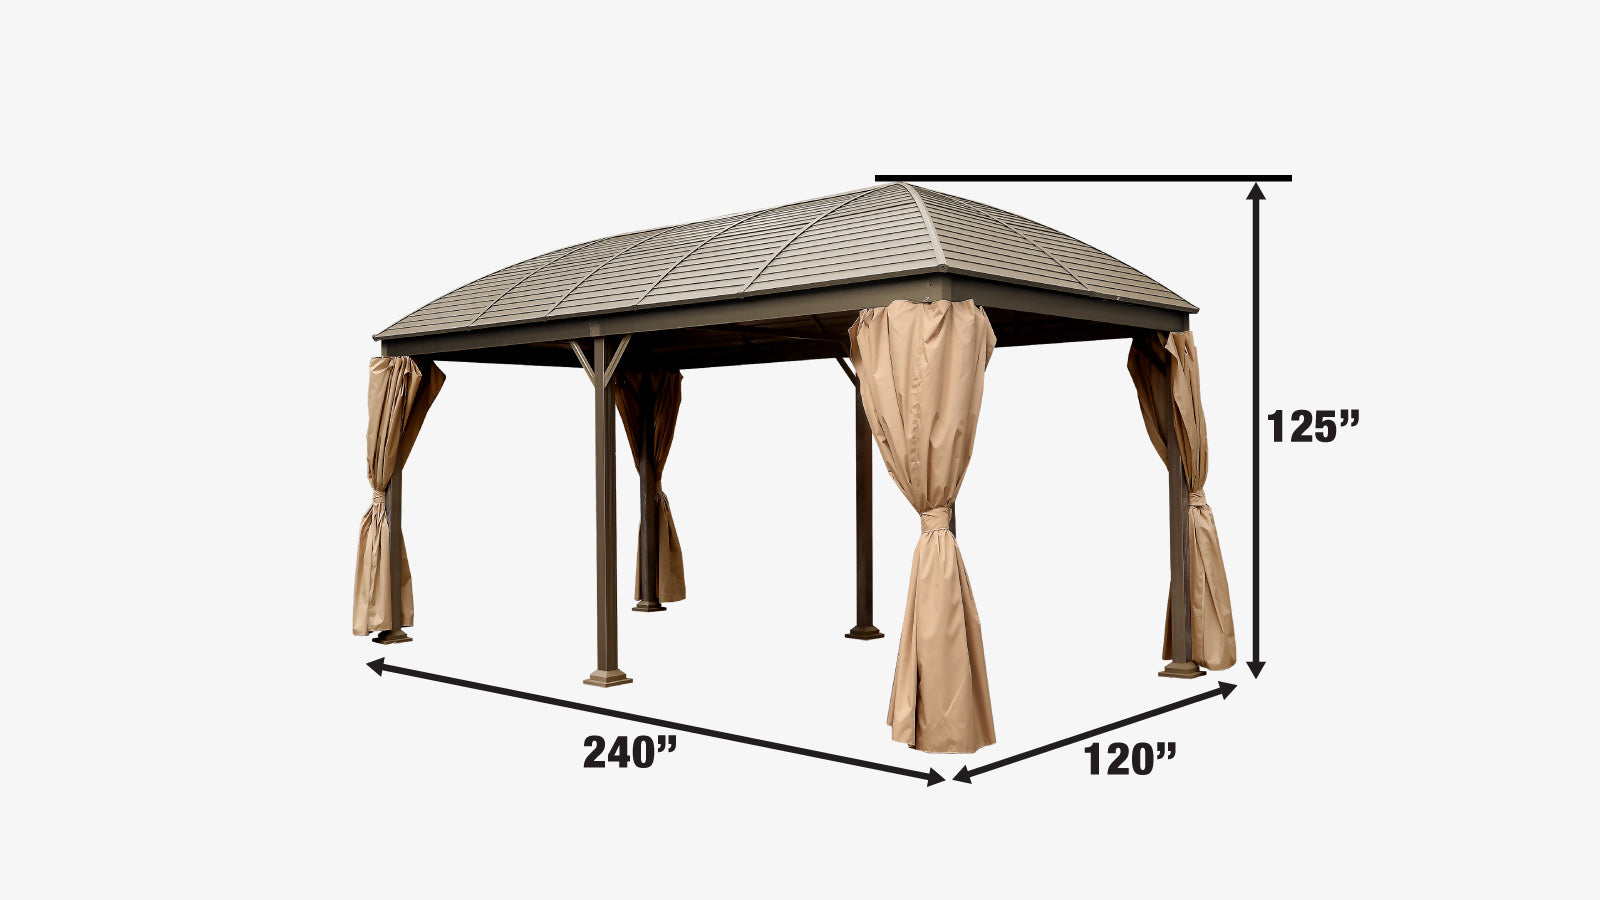 TMG Industrial 10’ x 20’ Hardtop Curved Steel Roof Patio Gazebo, Mosquito Nets & Curtains Included, TMG-LGZ20-specifications-image